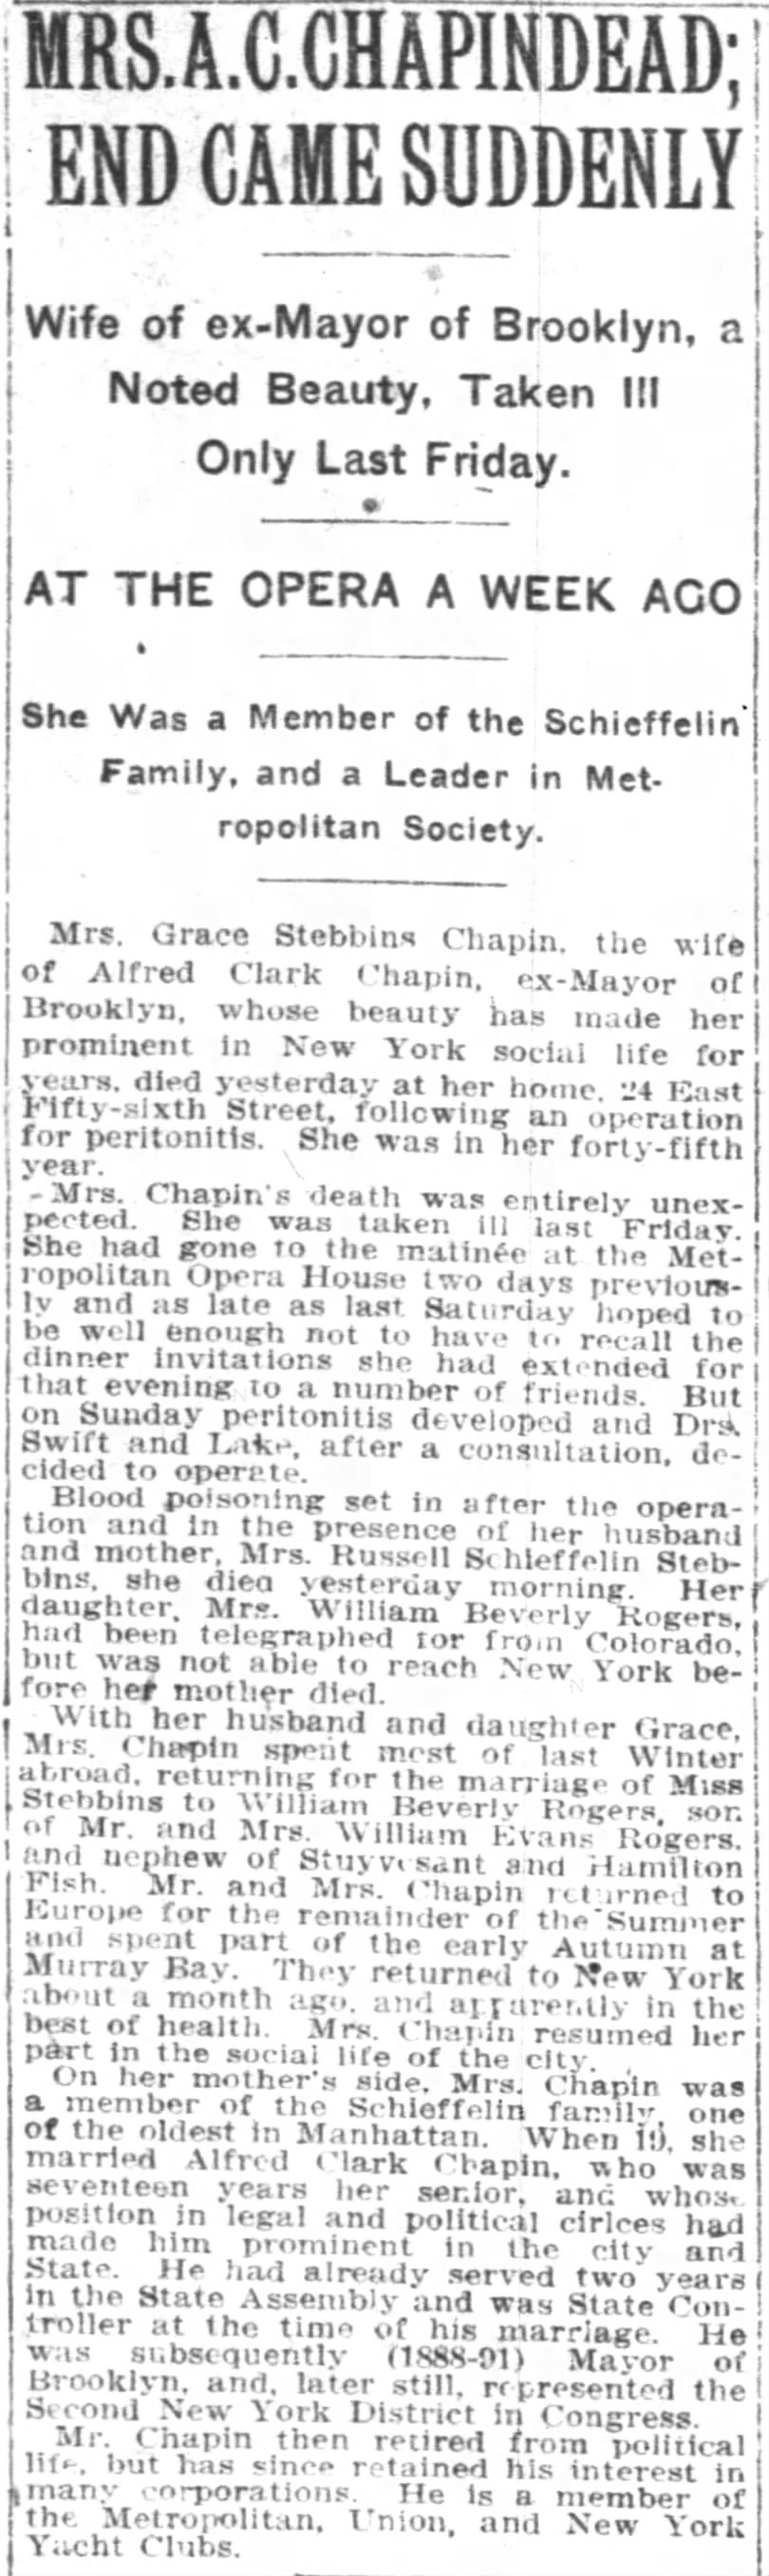 Mrs. A. C. Chapin Dead; End Came Suddenly